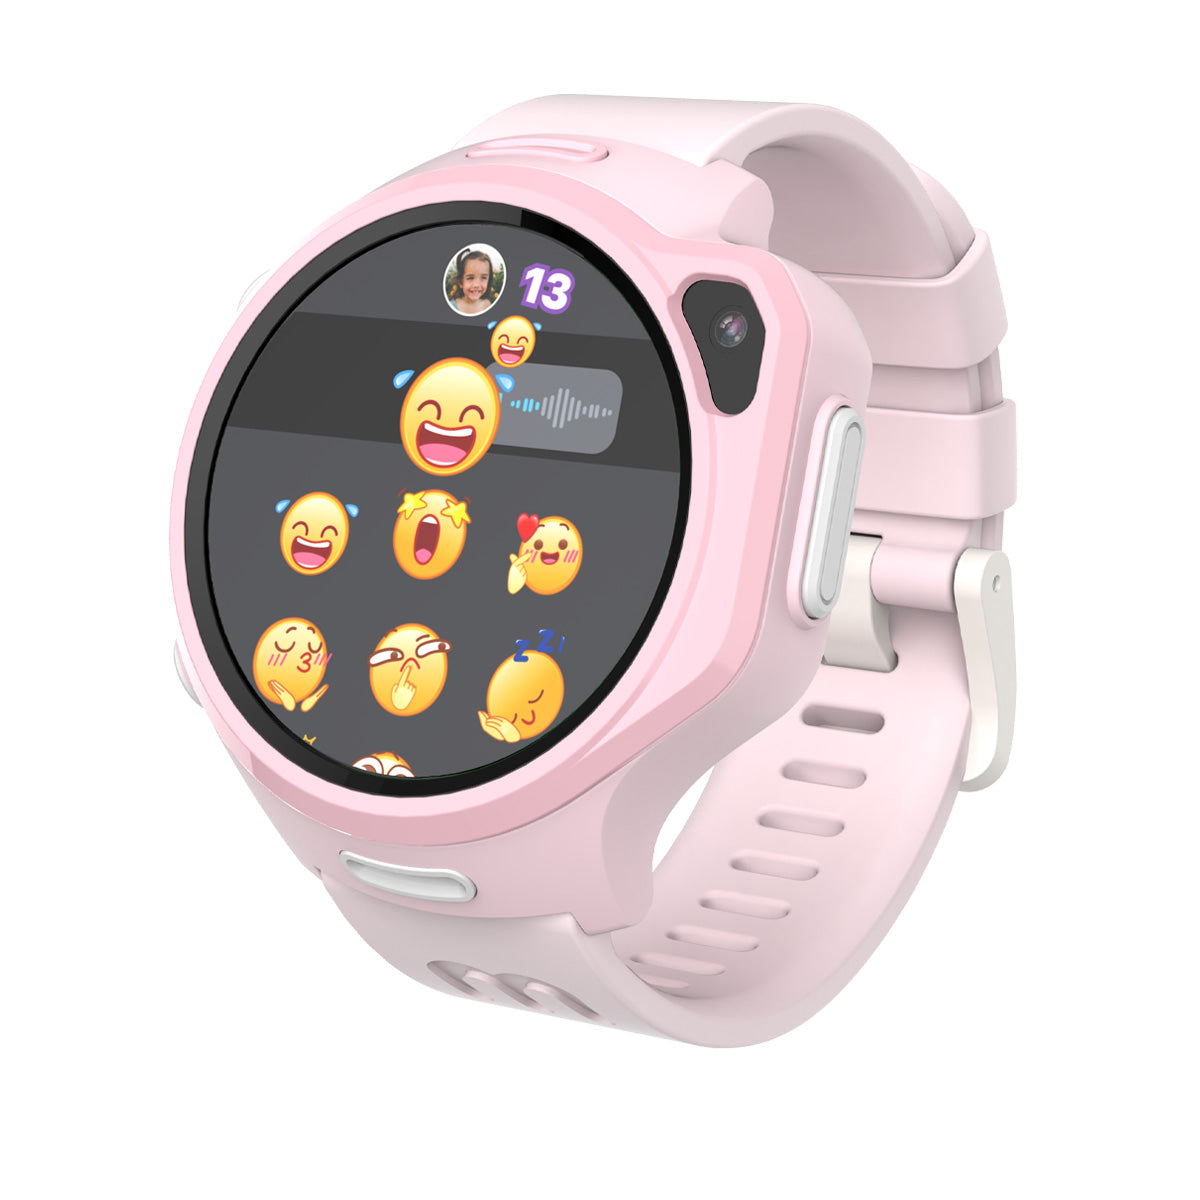 Smart Watch for Kids (Round) | Safe Cell Phone w/ GPS, Unlimited Data | myFirst Fone R2